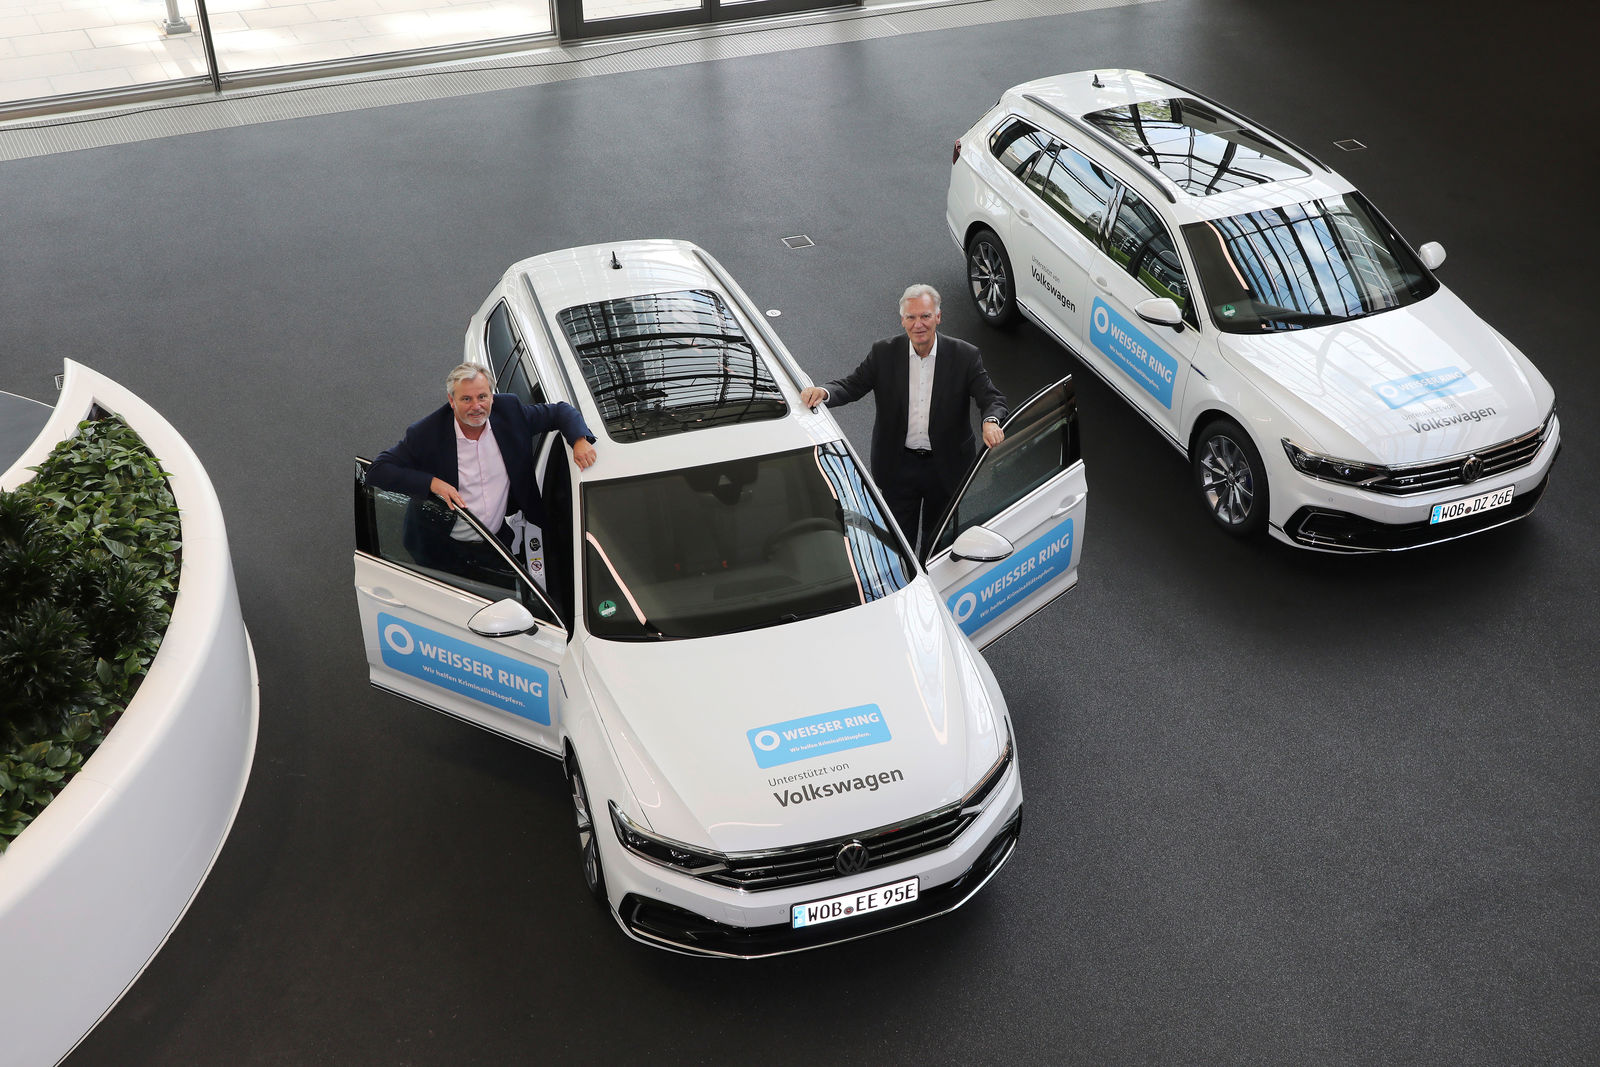 Volkswagen Group Security supports WEISSER RING